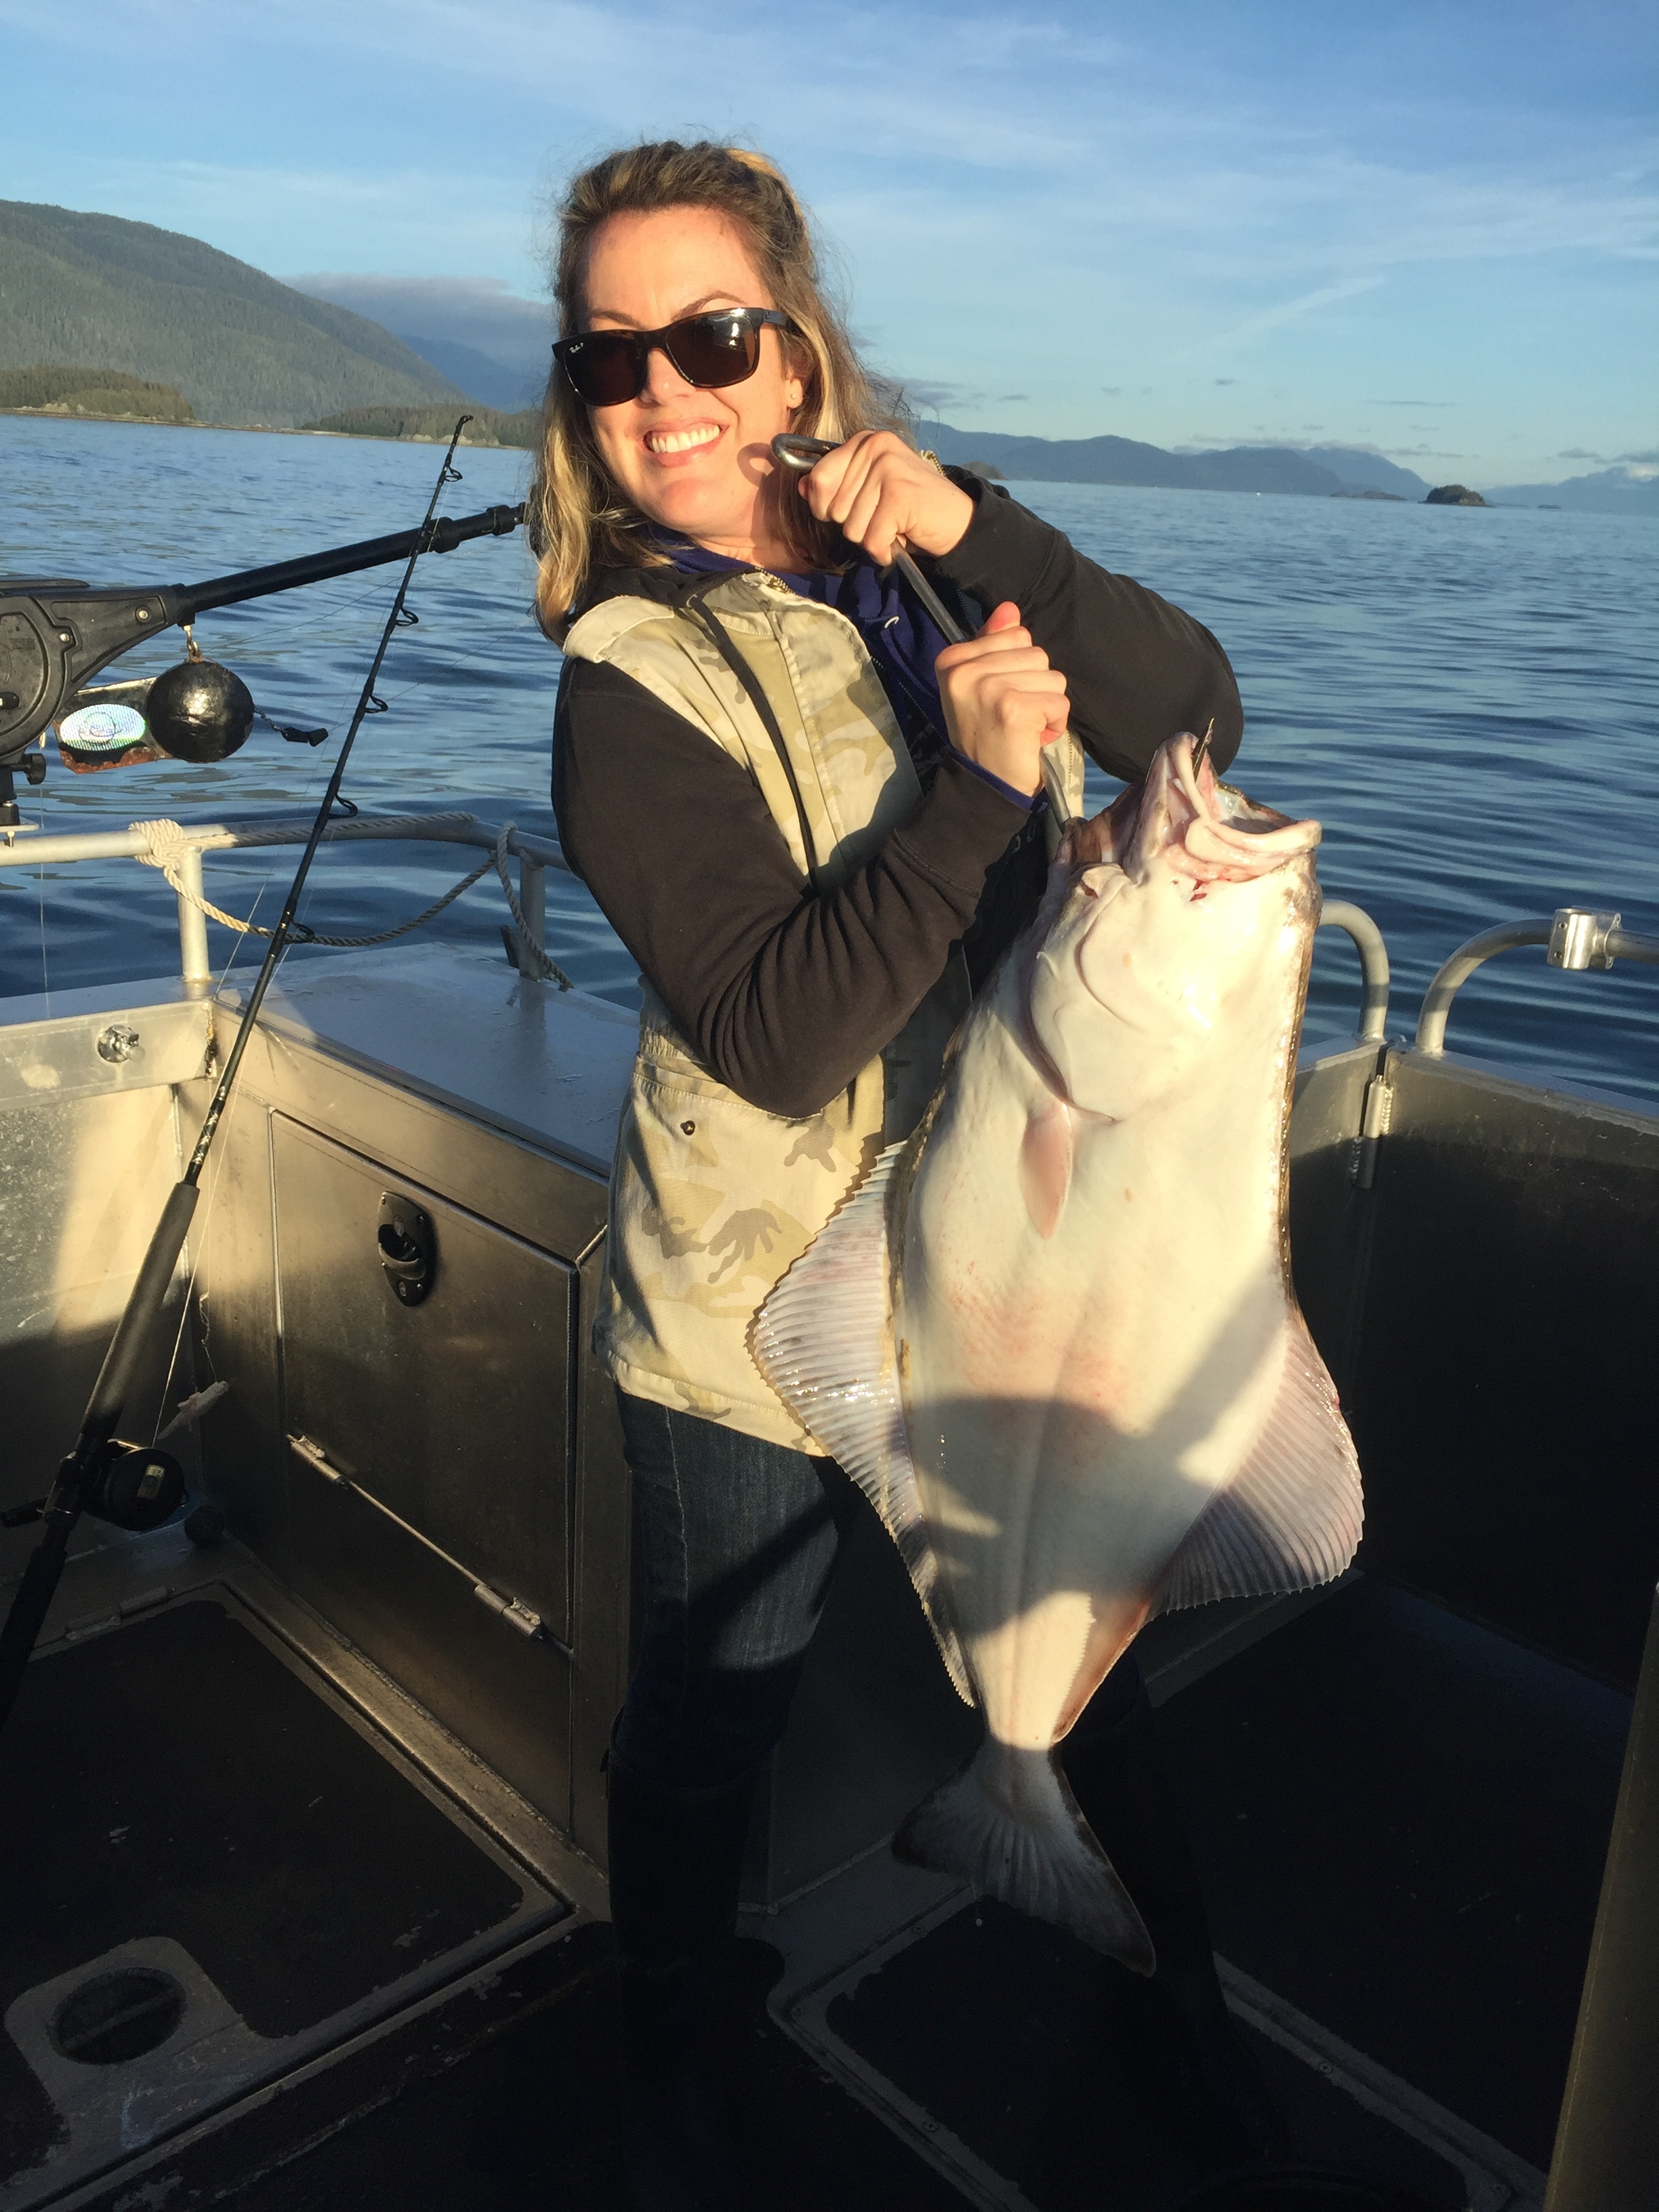 HiTime Lady with great smile and halibut